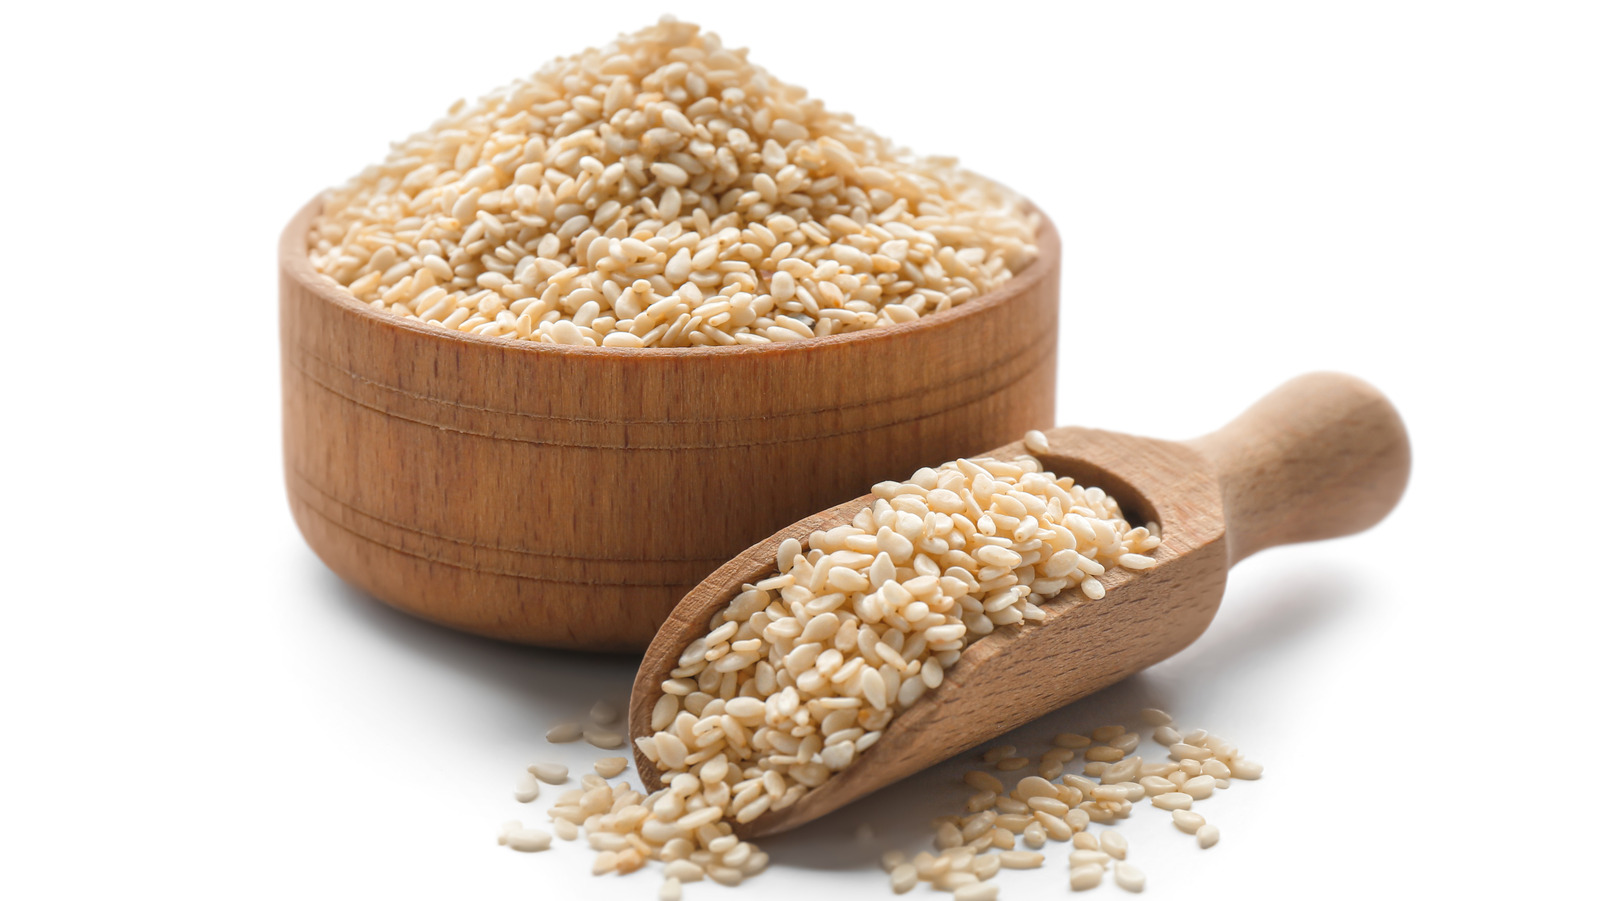 What Are Sesame Seeds Really?